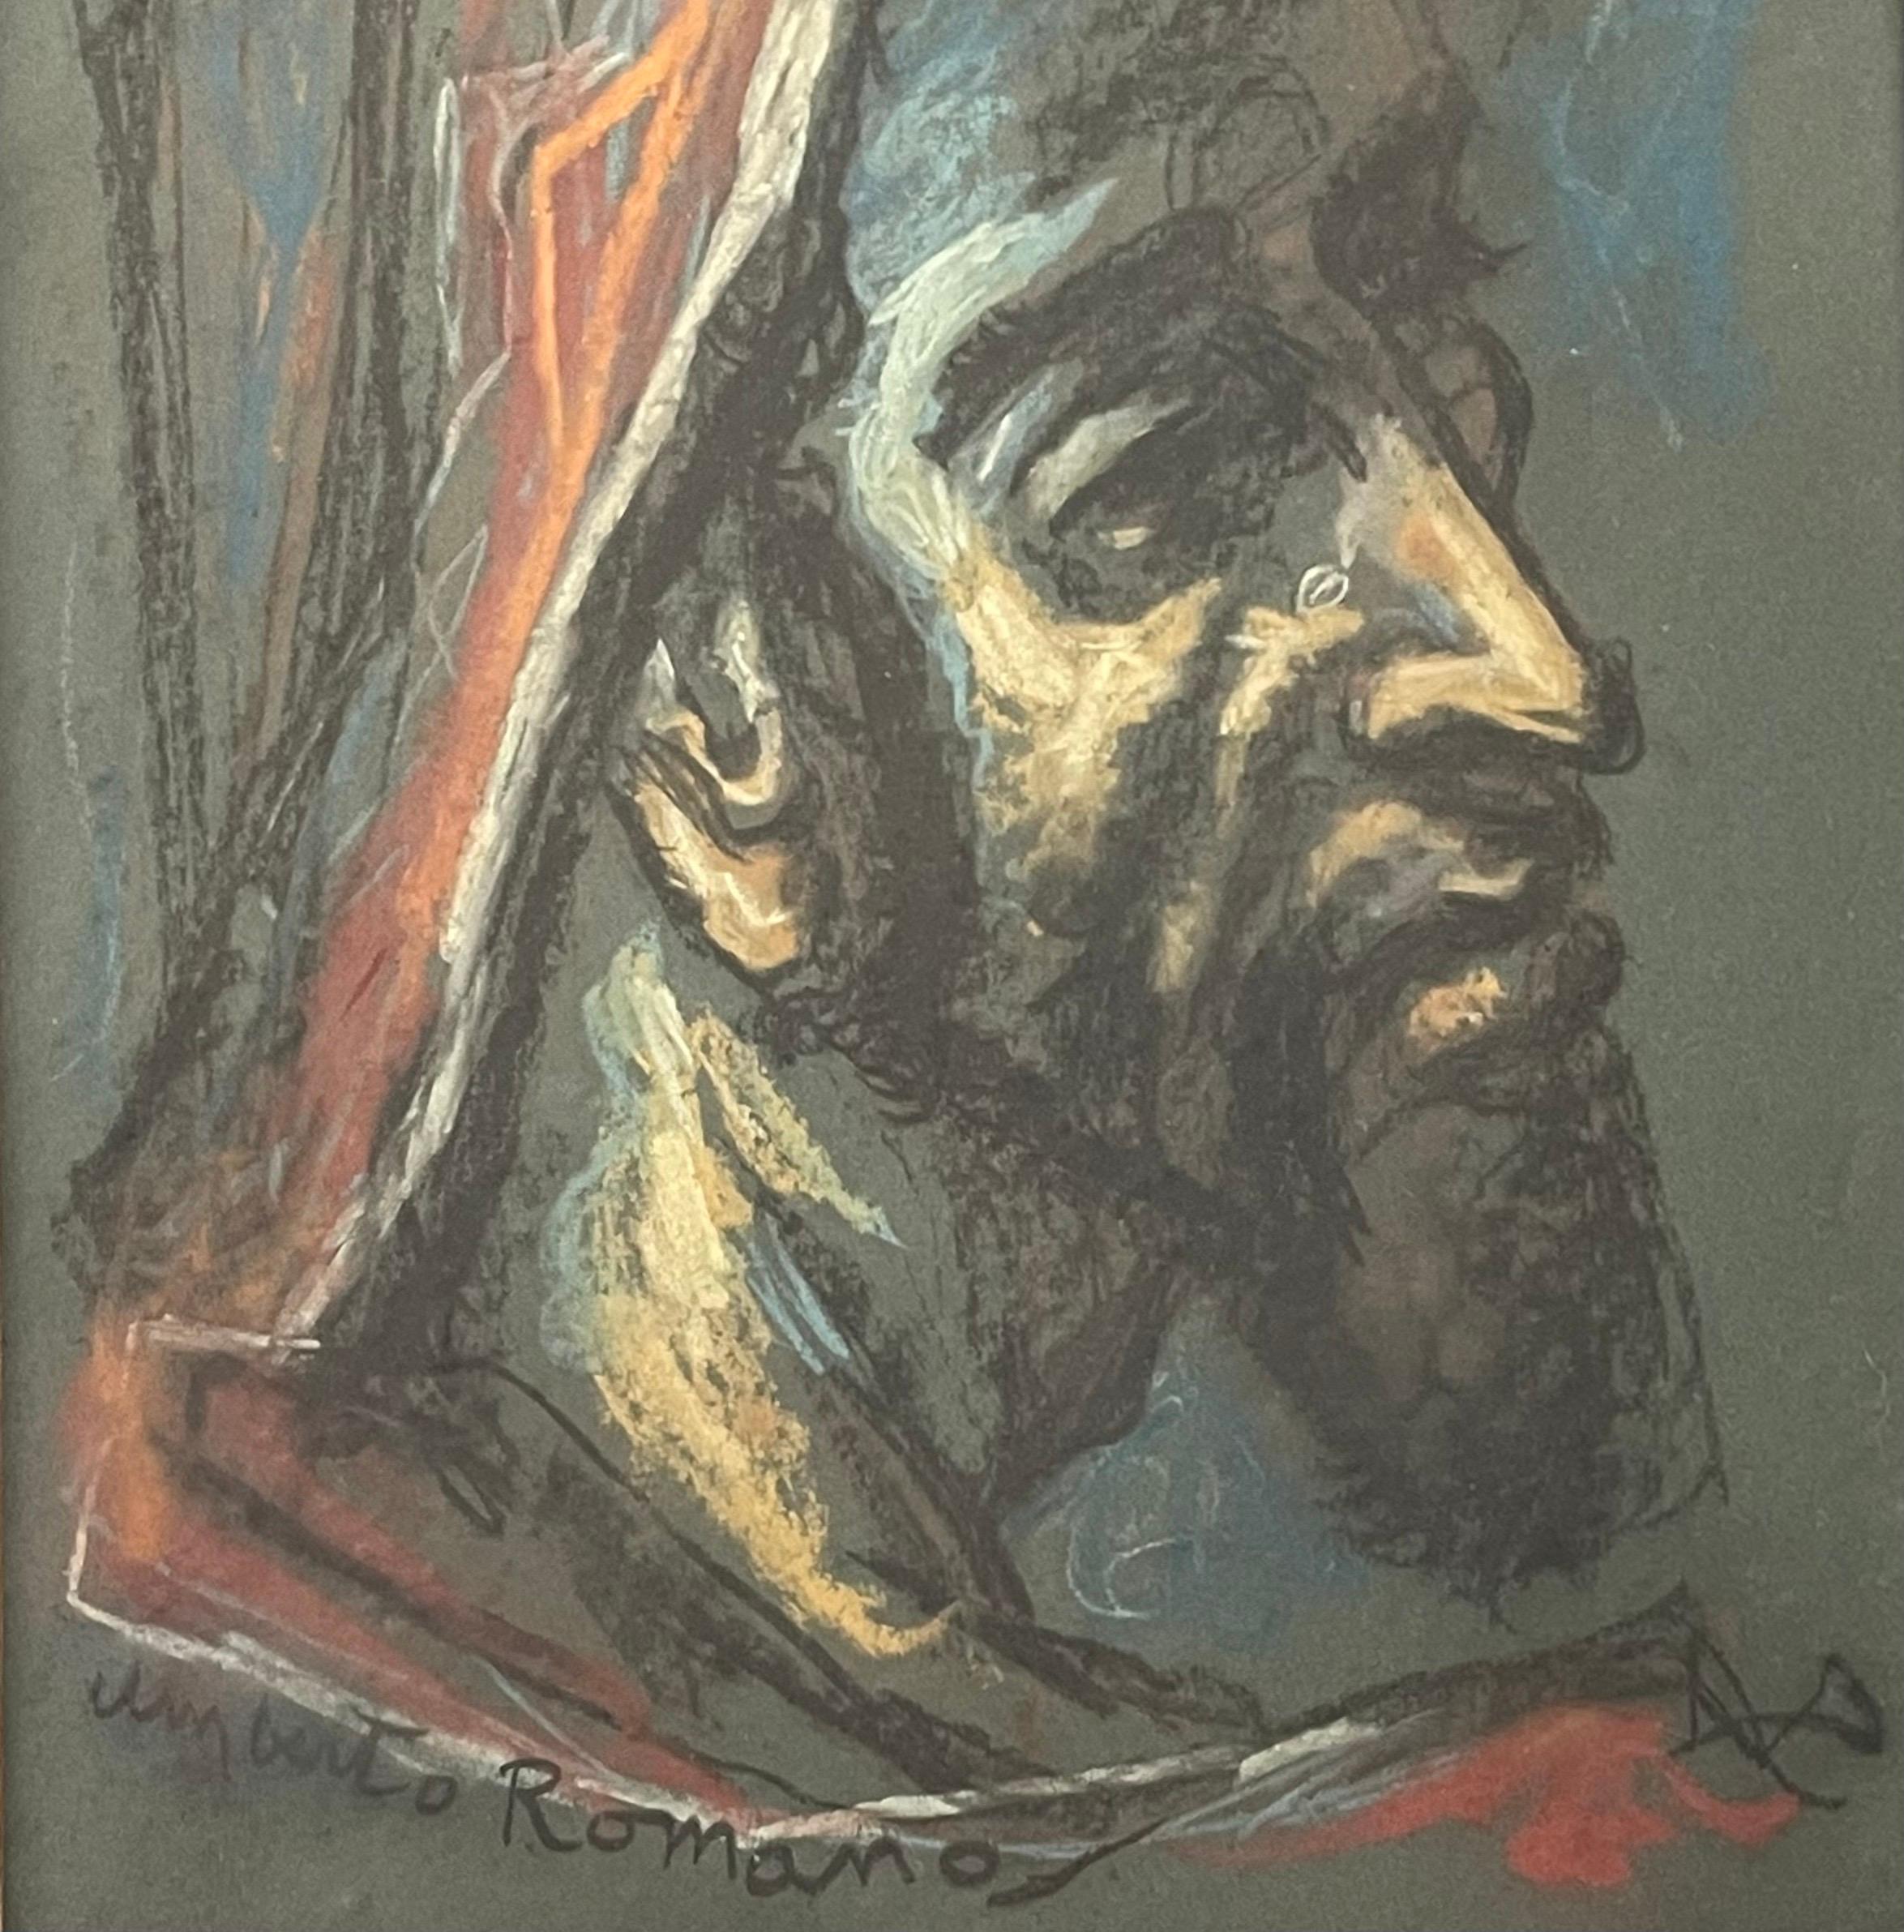 Umberto Romano, Italian-American (1906-1982)
Corrado
Painting Pastel on Paper, 
In Original Carved Wood Frame Under Glass. 
Dimensions: Sight: 12